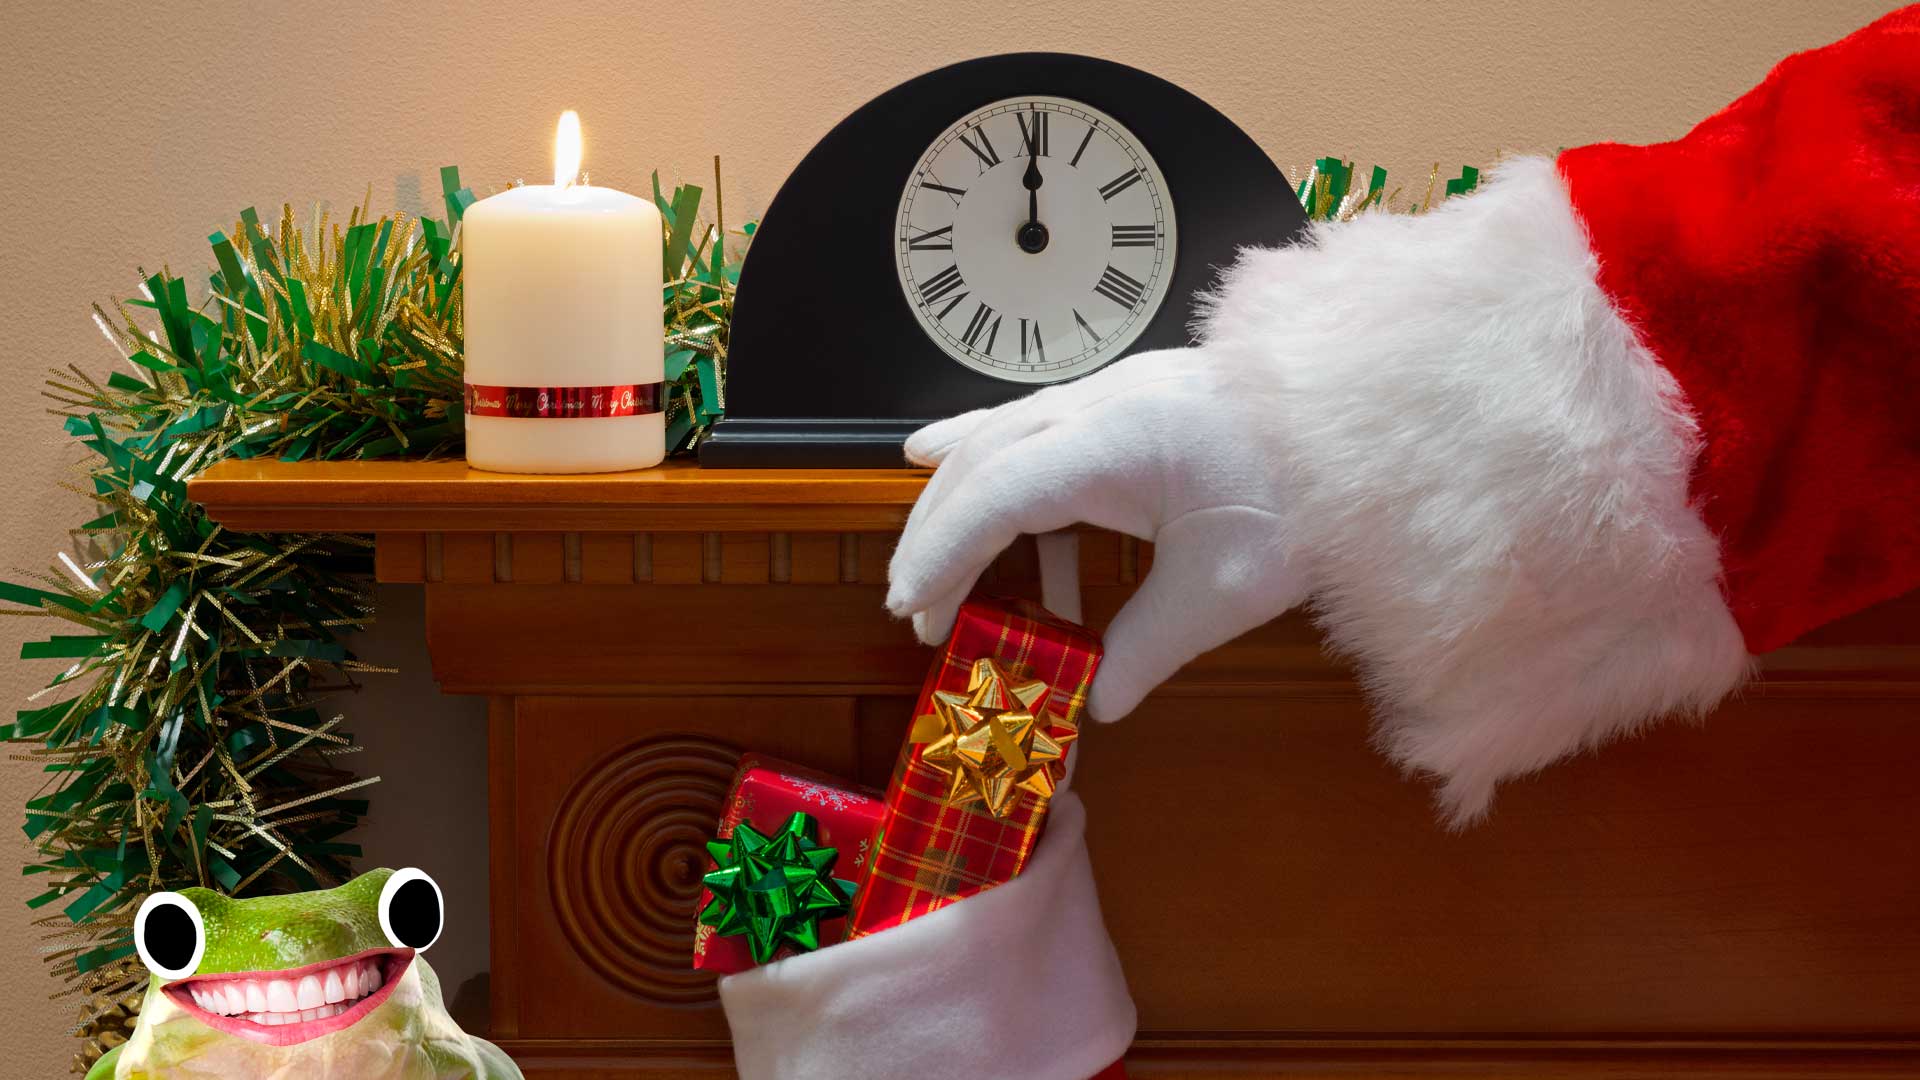 Santa puts gifts into a Christmas stocking while a frog watches